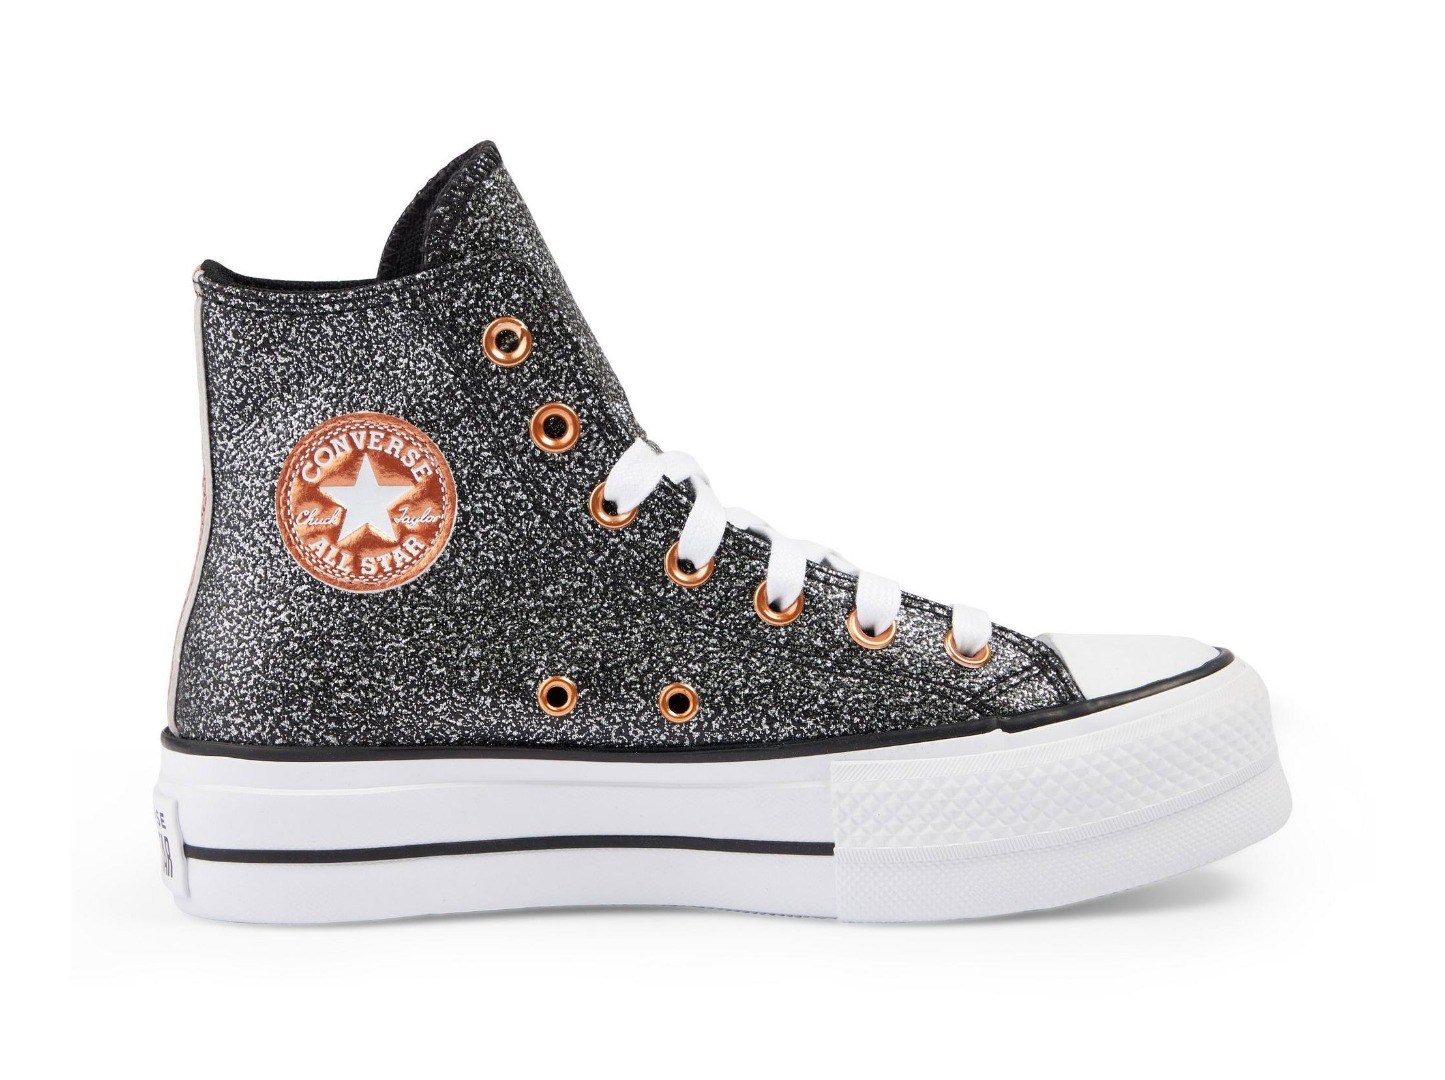 CONVERSE CHUCK TAYLOR ALL STAR LIFT FOREST GLAM A01301C Μαύρο 161309